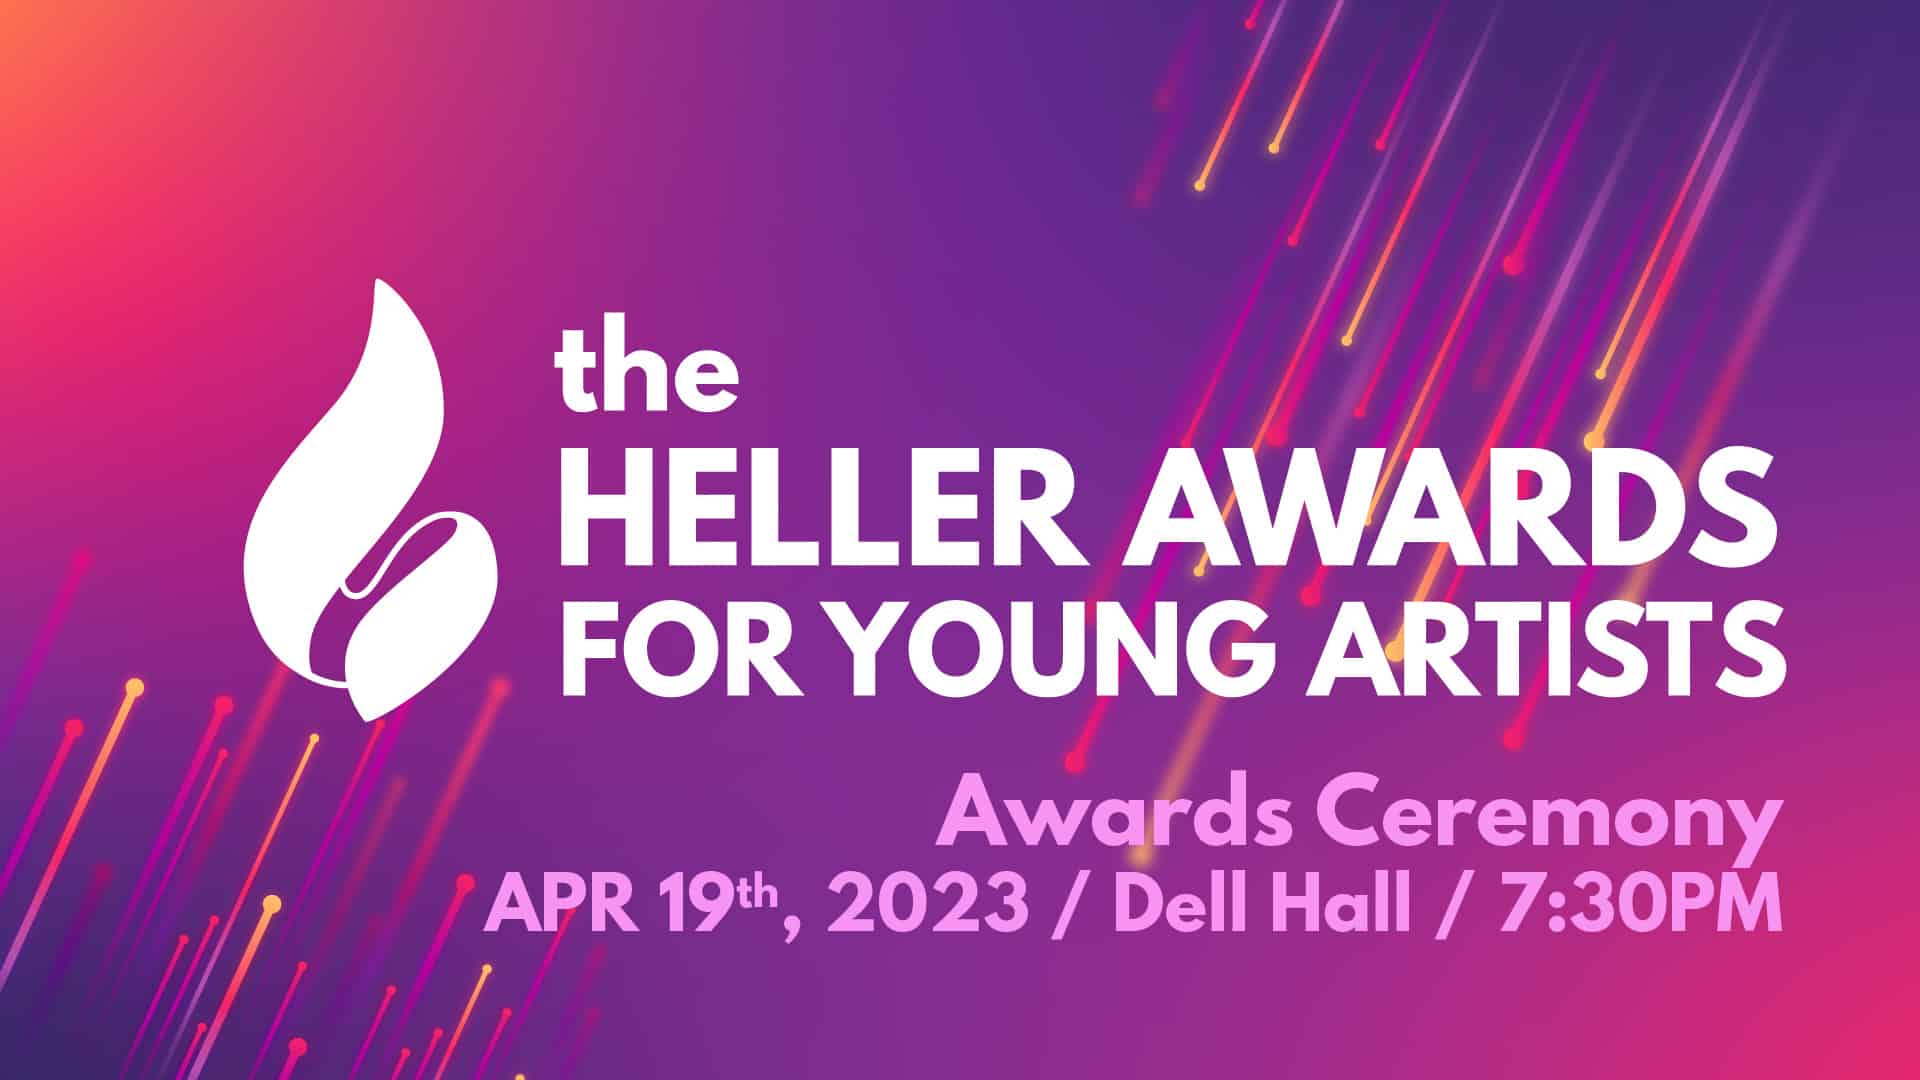 Heller Awards For Young Artists 2023